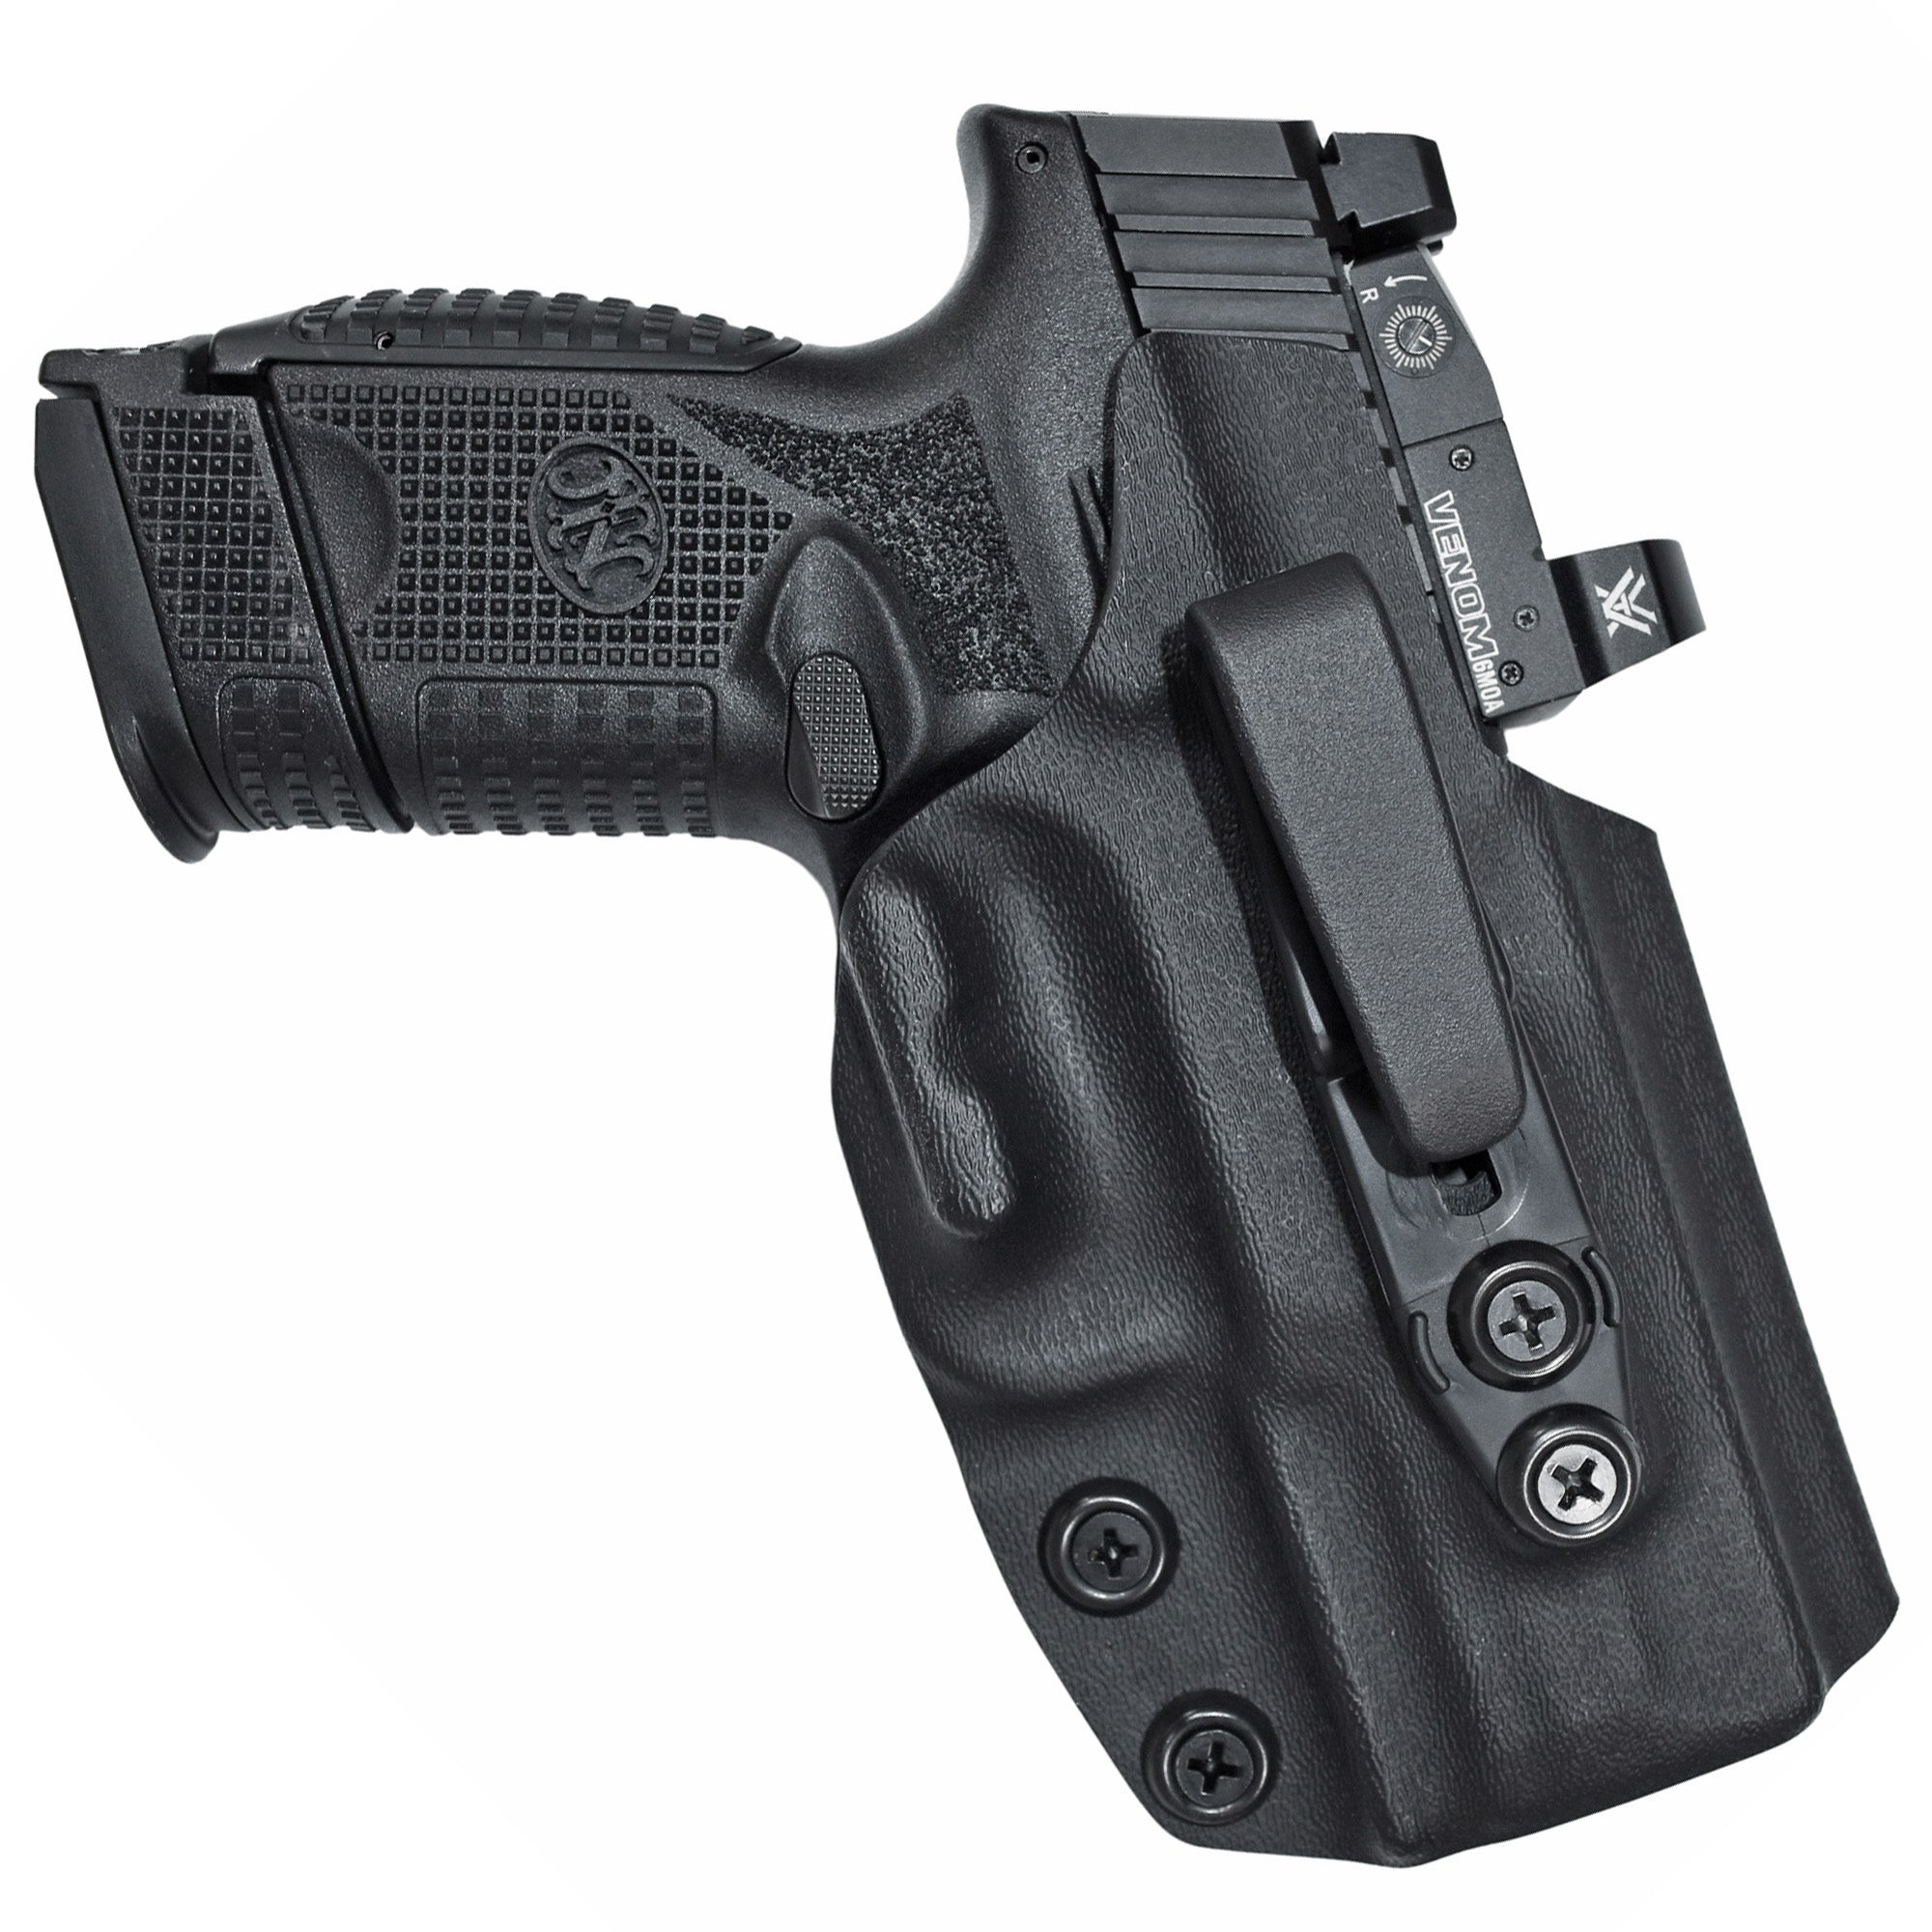 FN 509 Tactical Holster - Made in U.S.A. - Lifetime Warranty